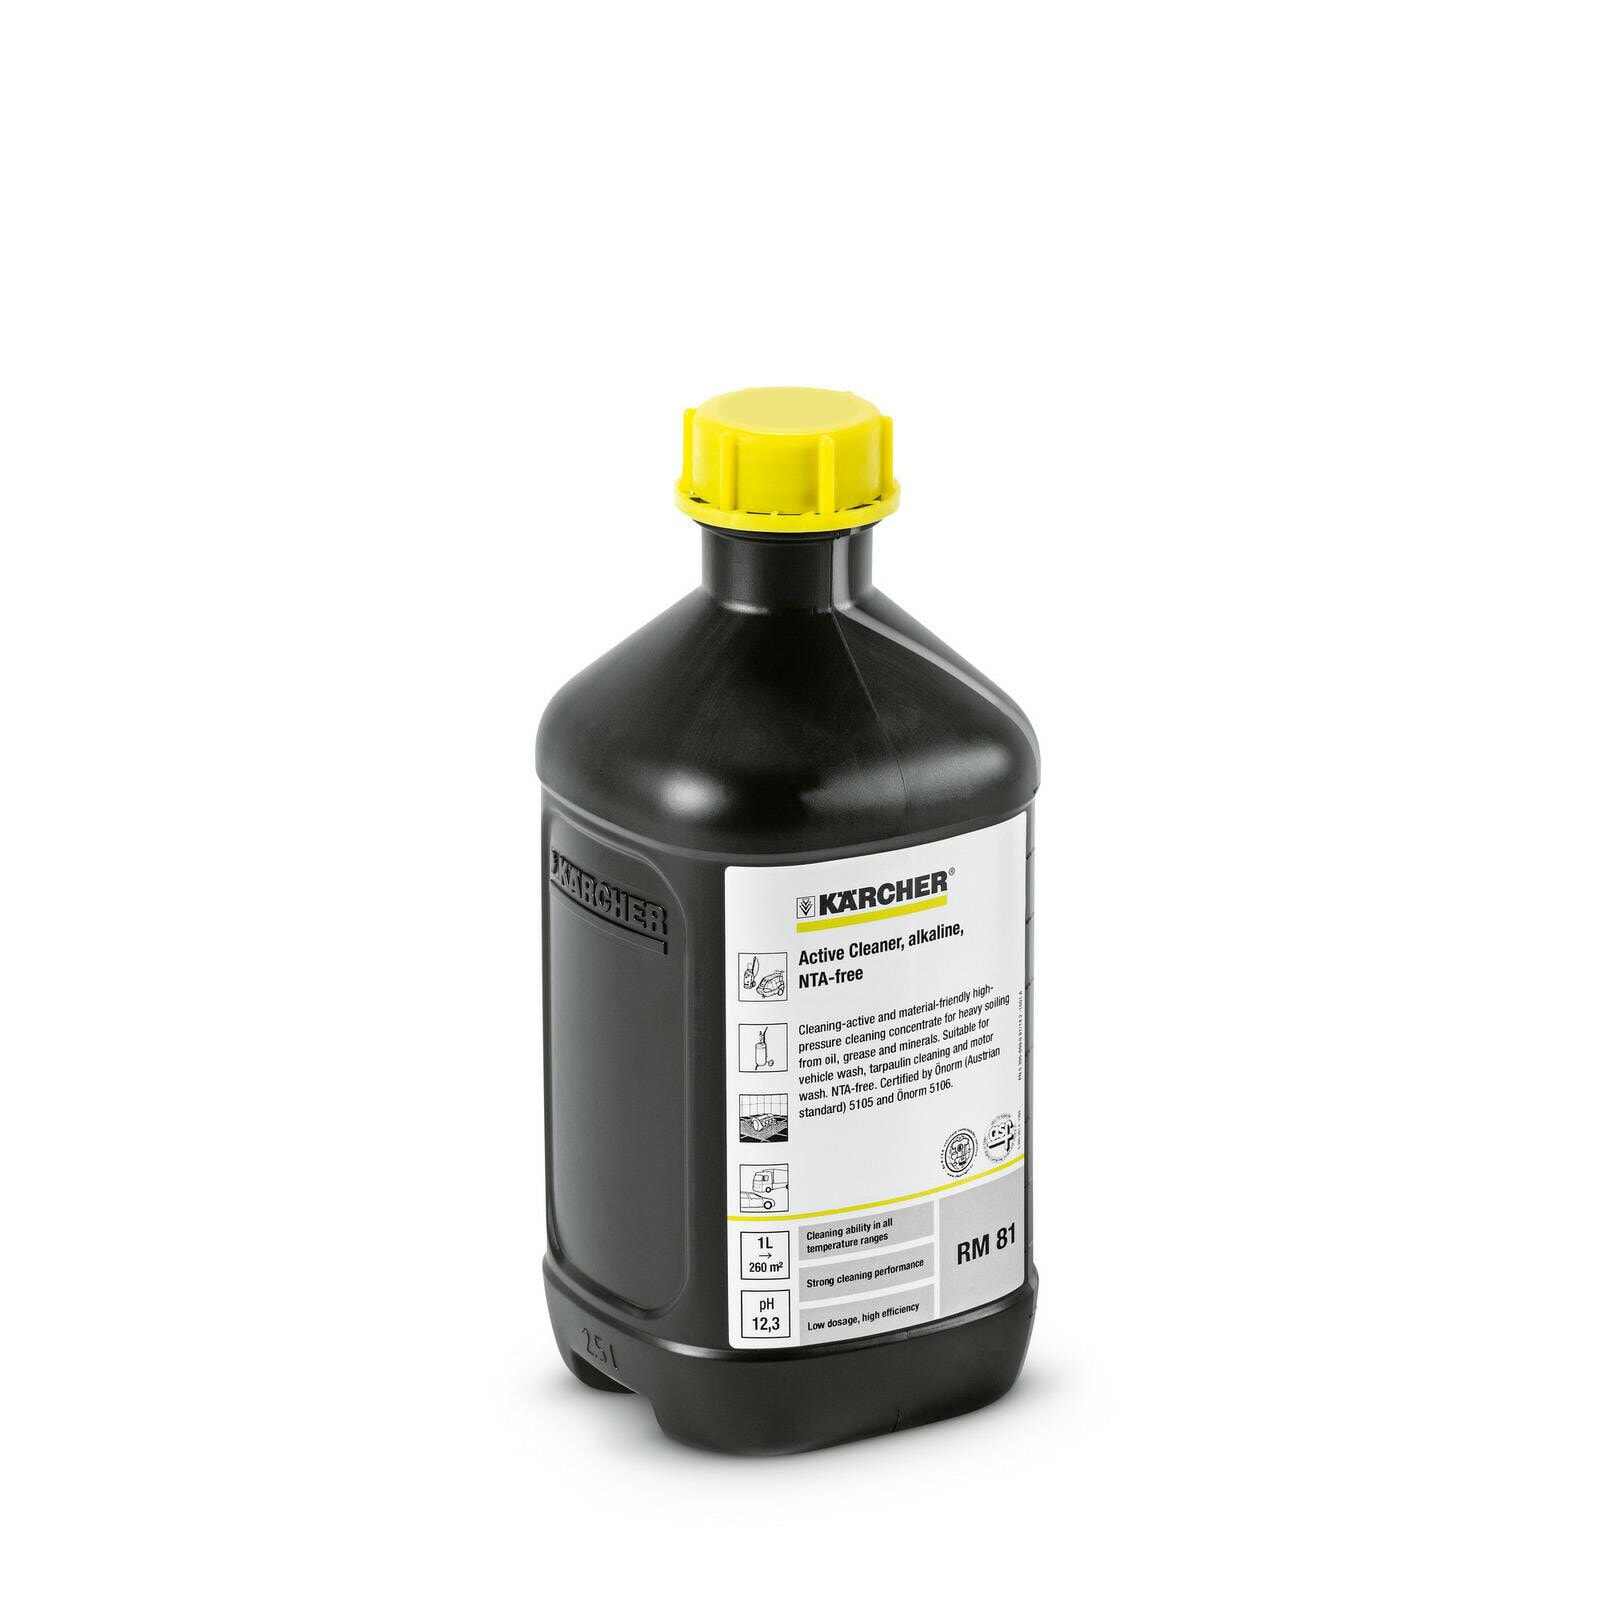 Karcher Active Cleaning Agent RM 81 ASF 2.5L